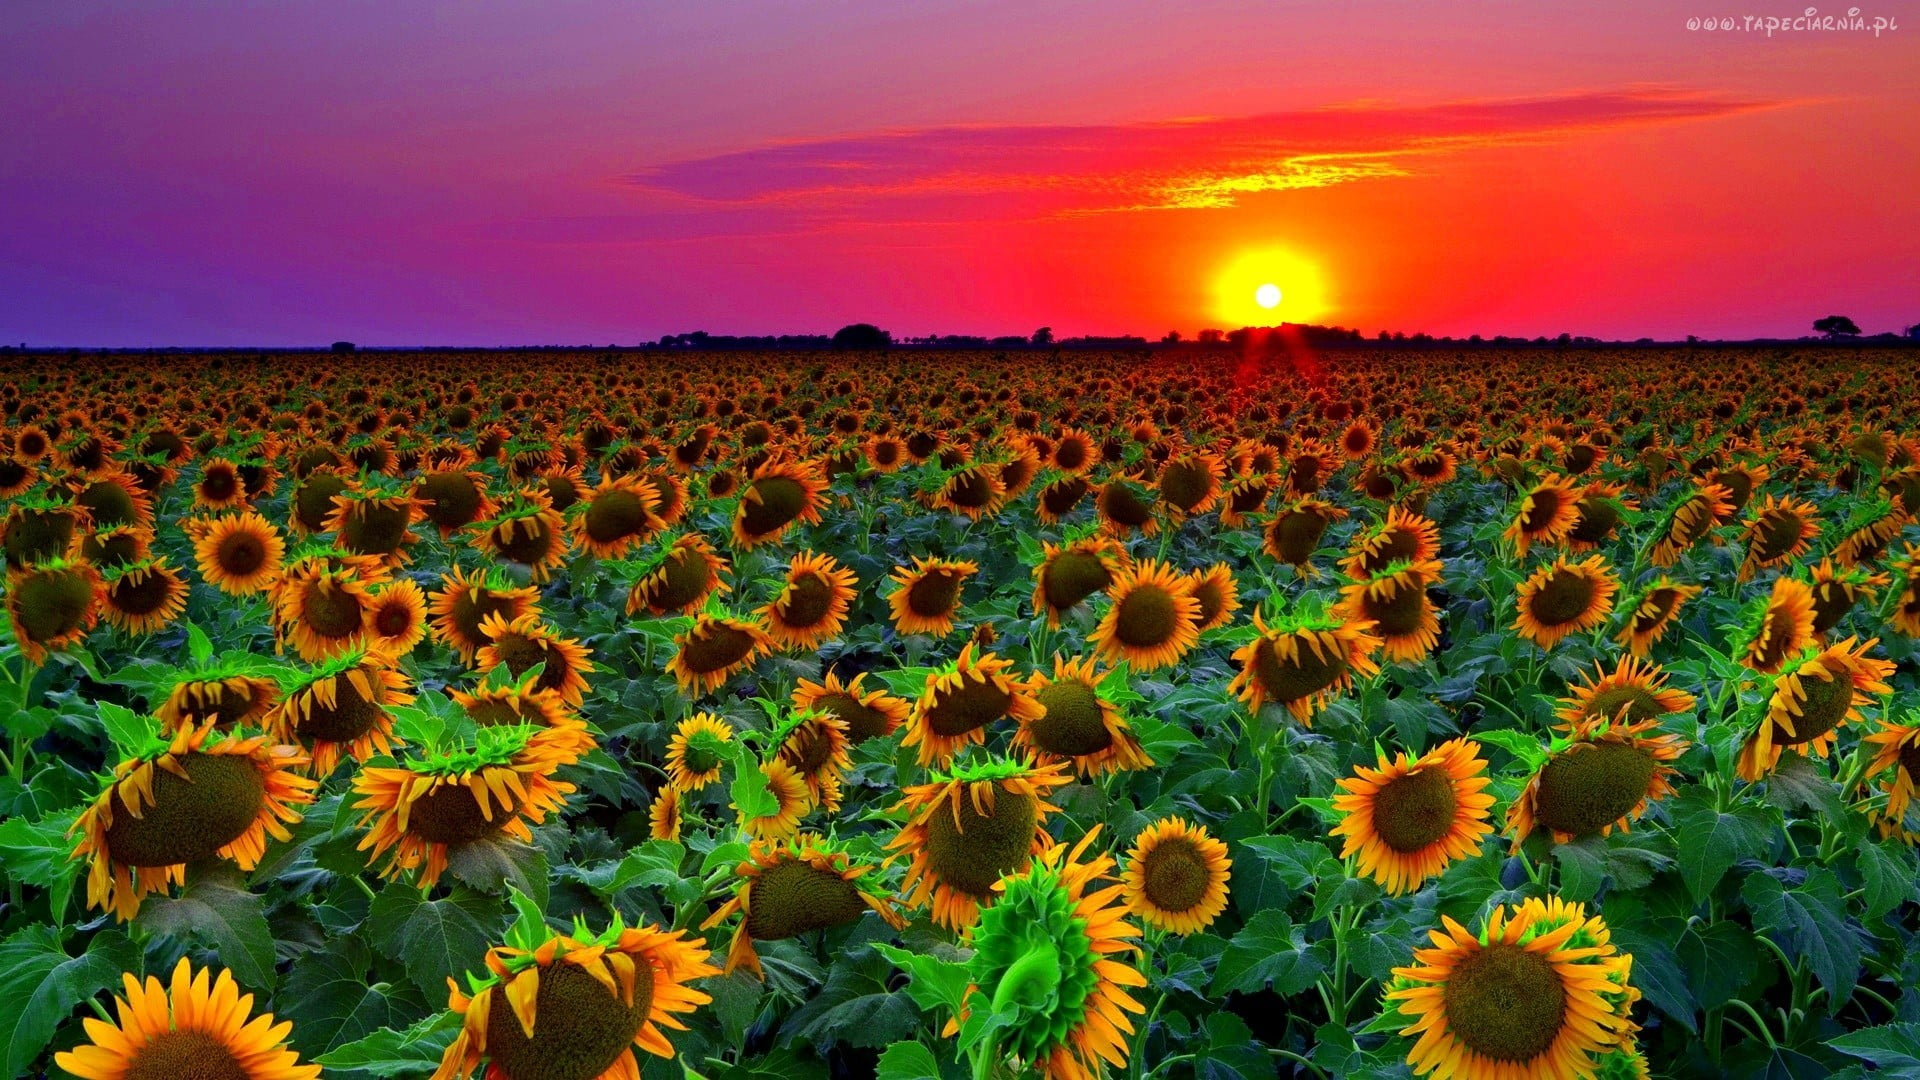 1920x1080 Bed of sunflowers, nature HD wallpaper